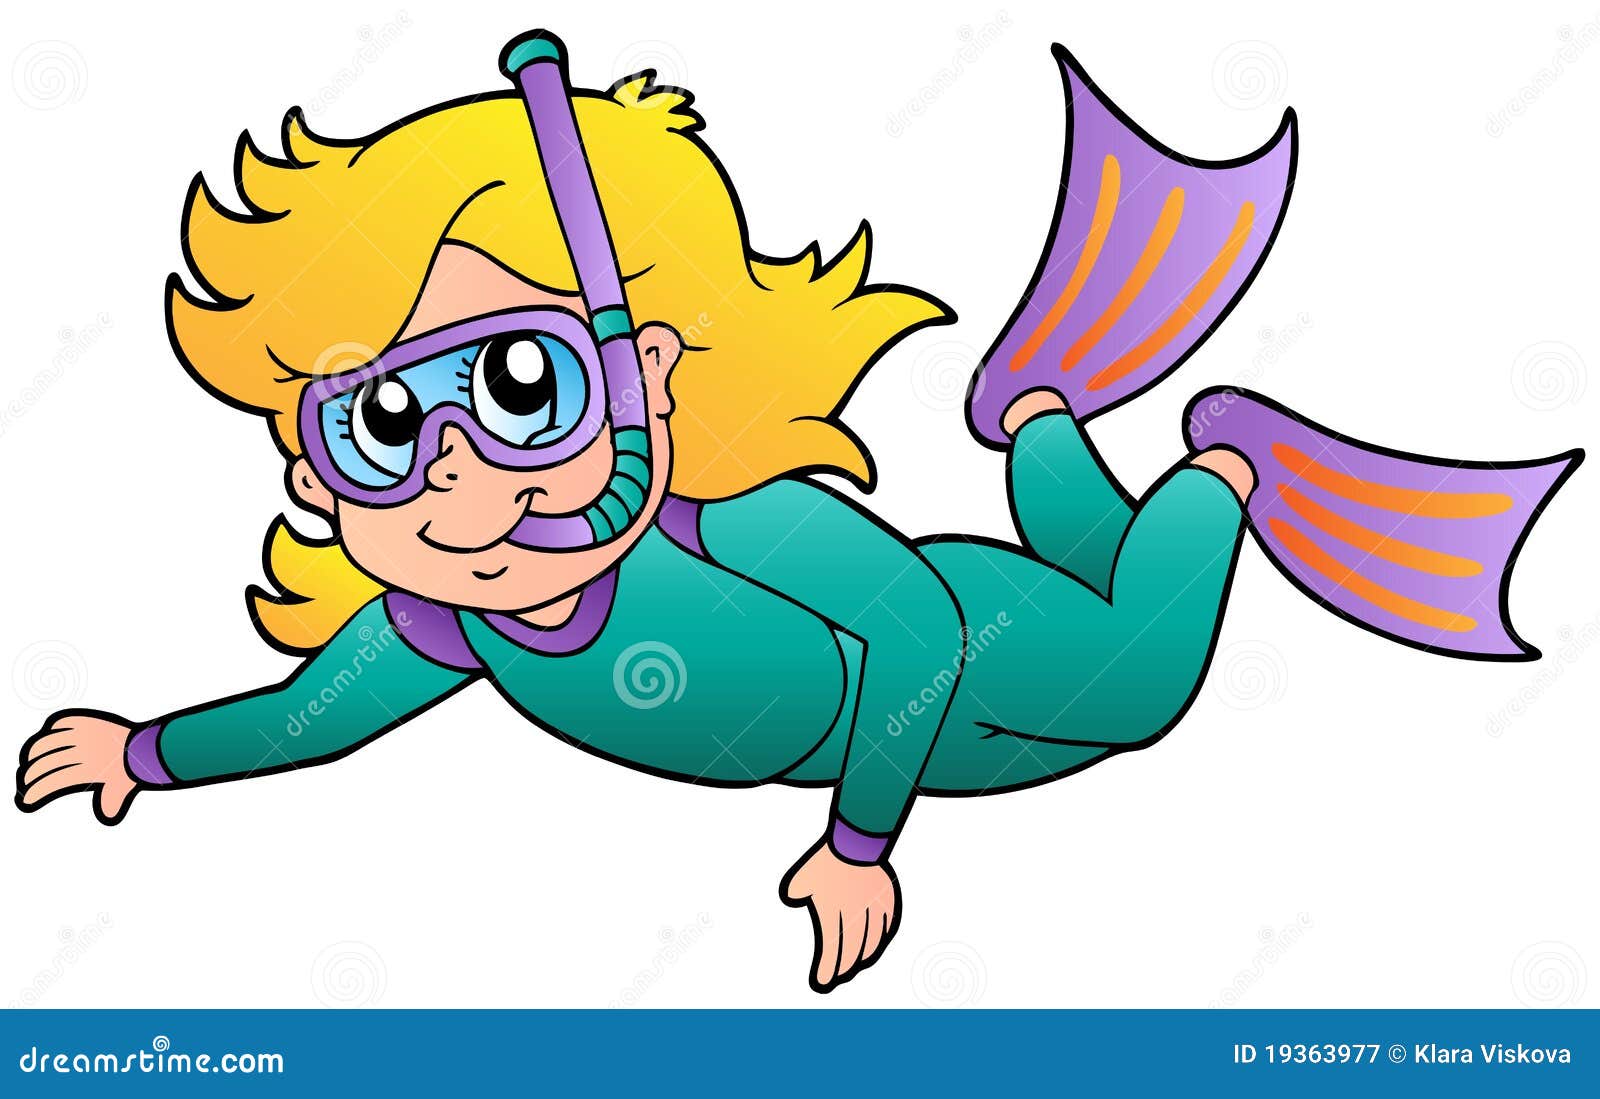 Swimming Girl Snorkel Diver Royalty Free Stock Photography - Image